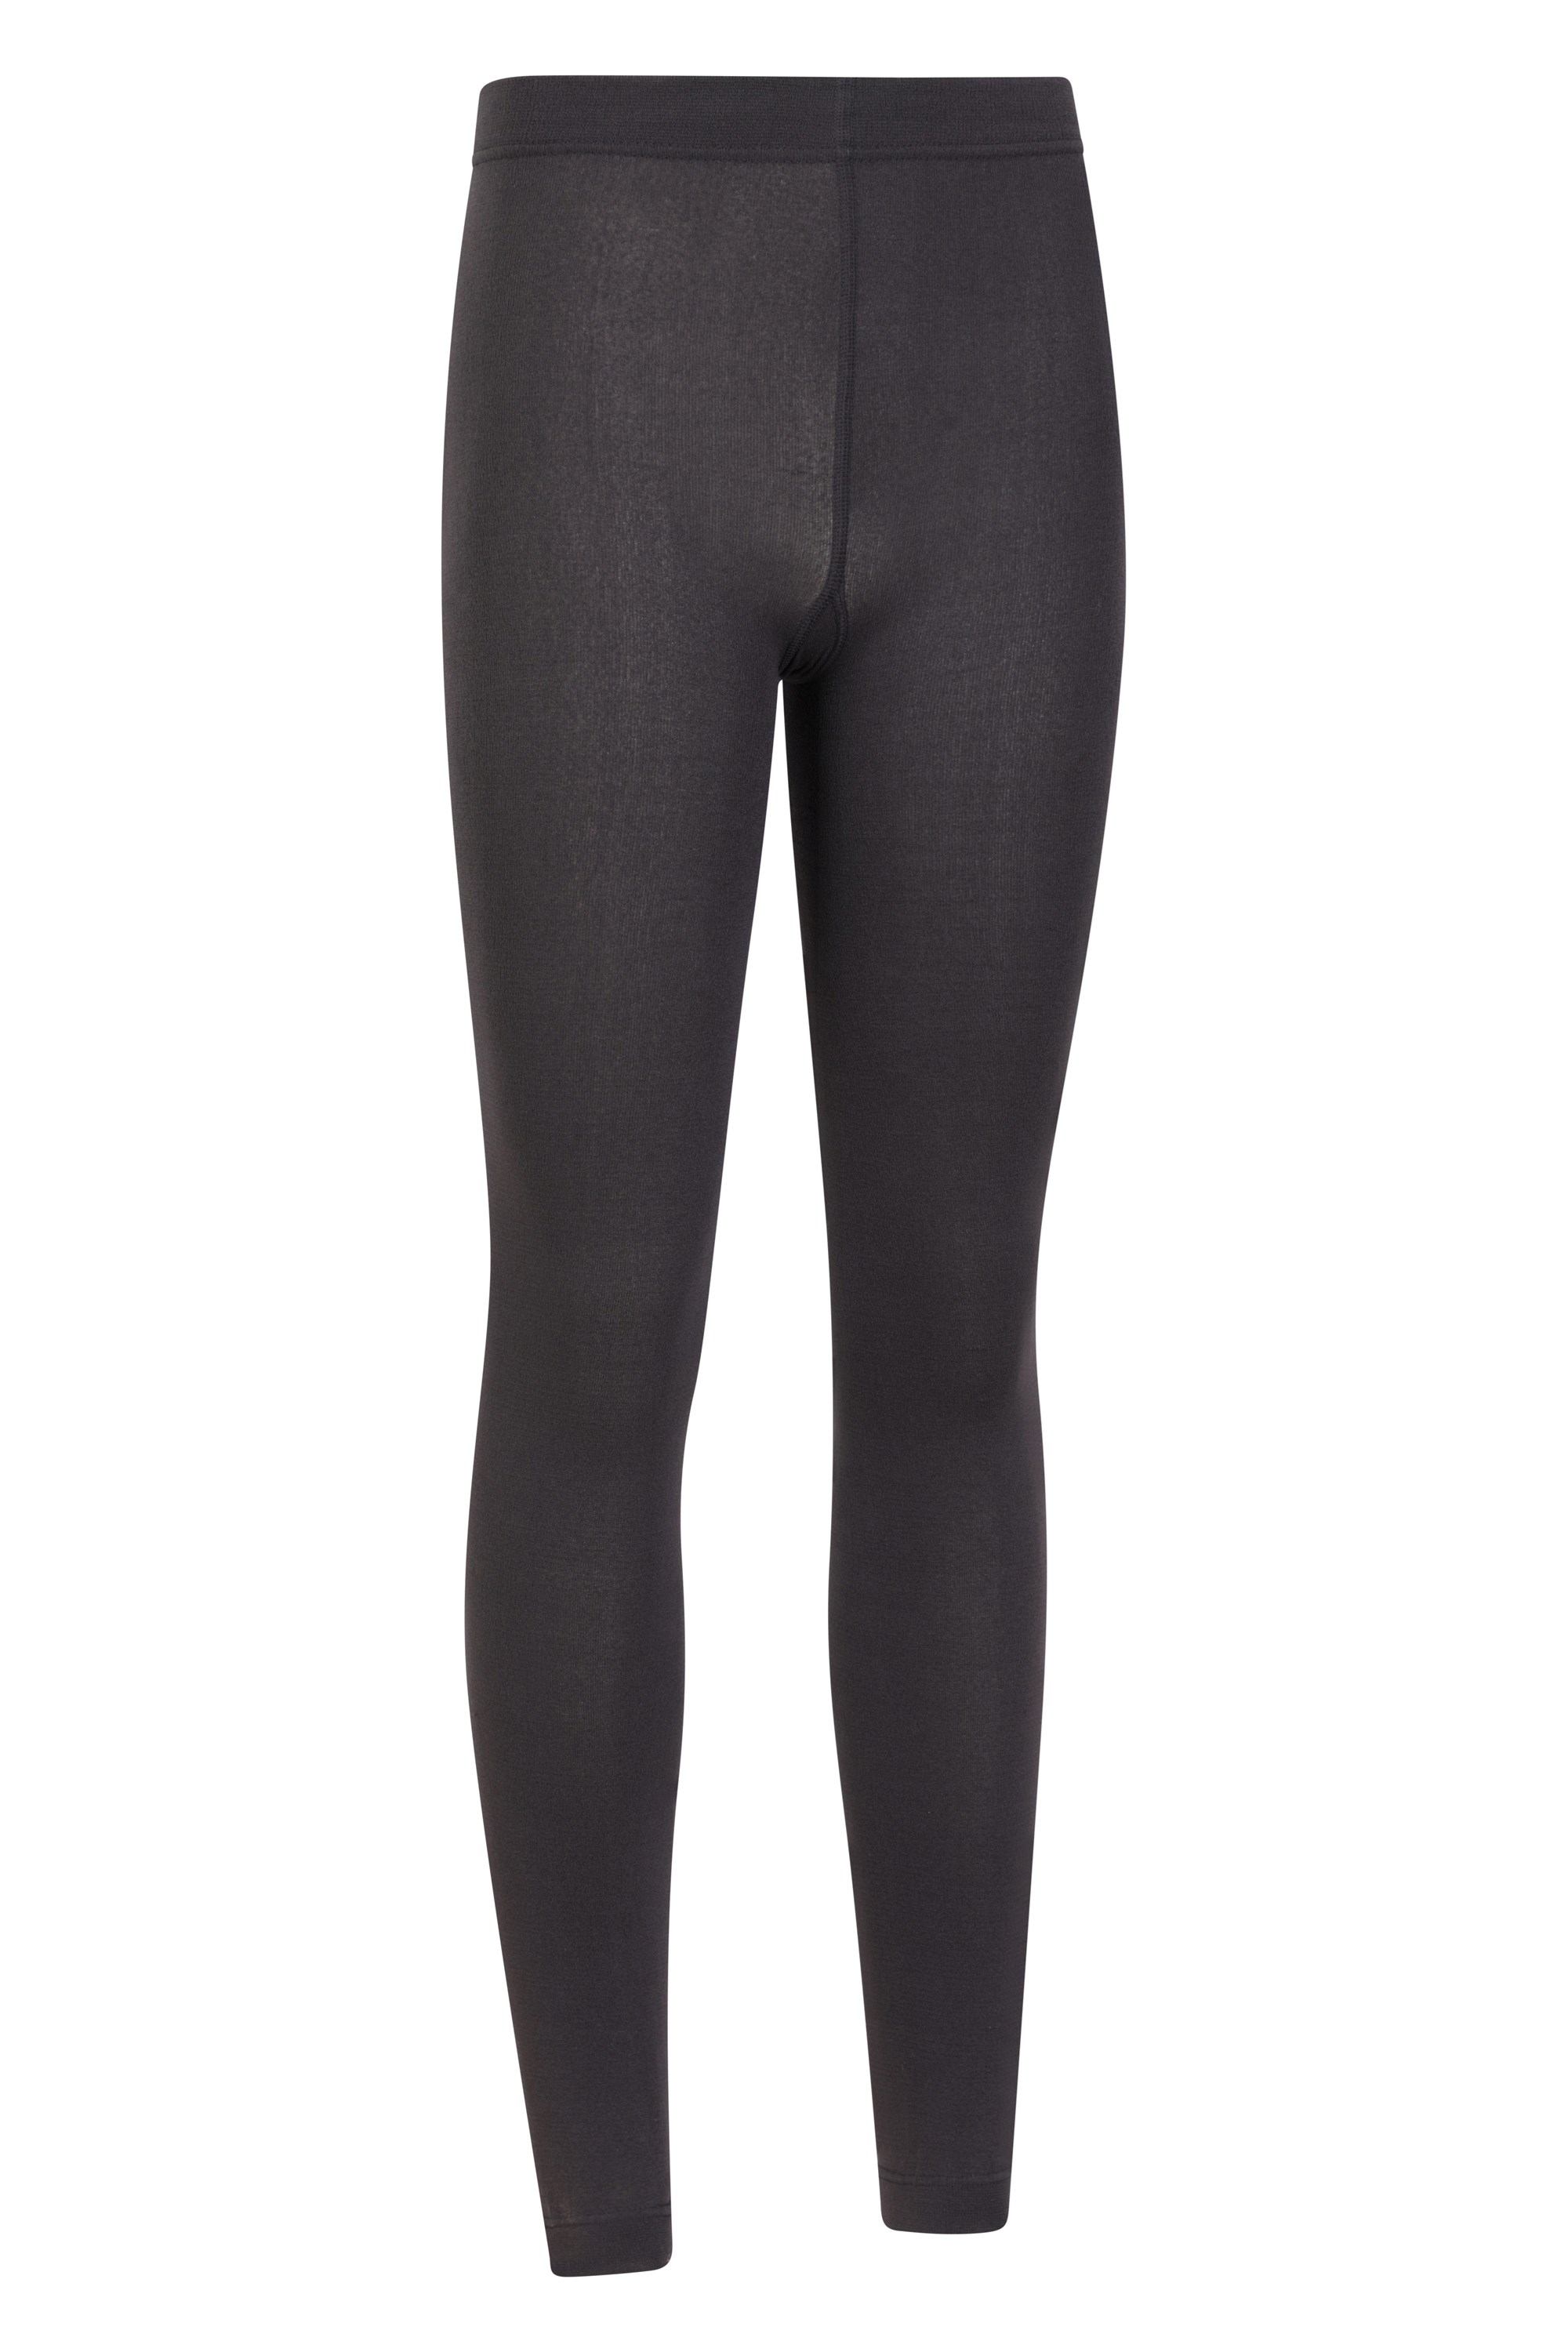 Mountain Warehouse IsoTherm Womens Brushed Thermal Leggings RM7